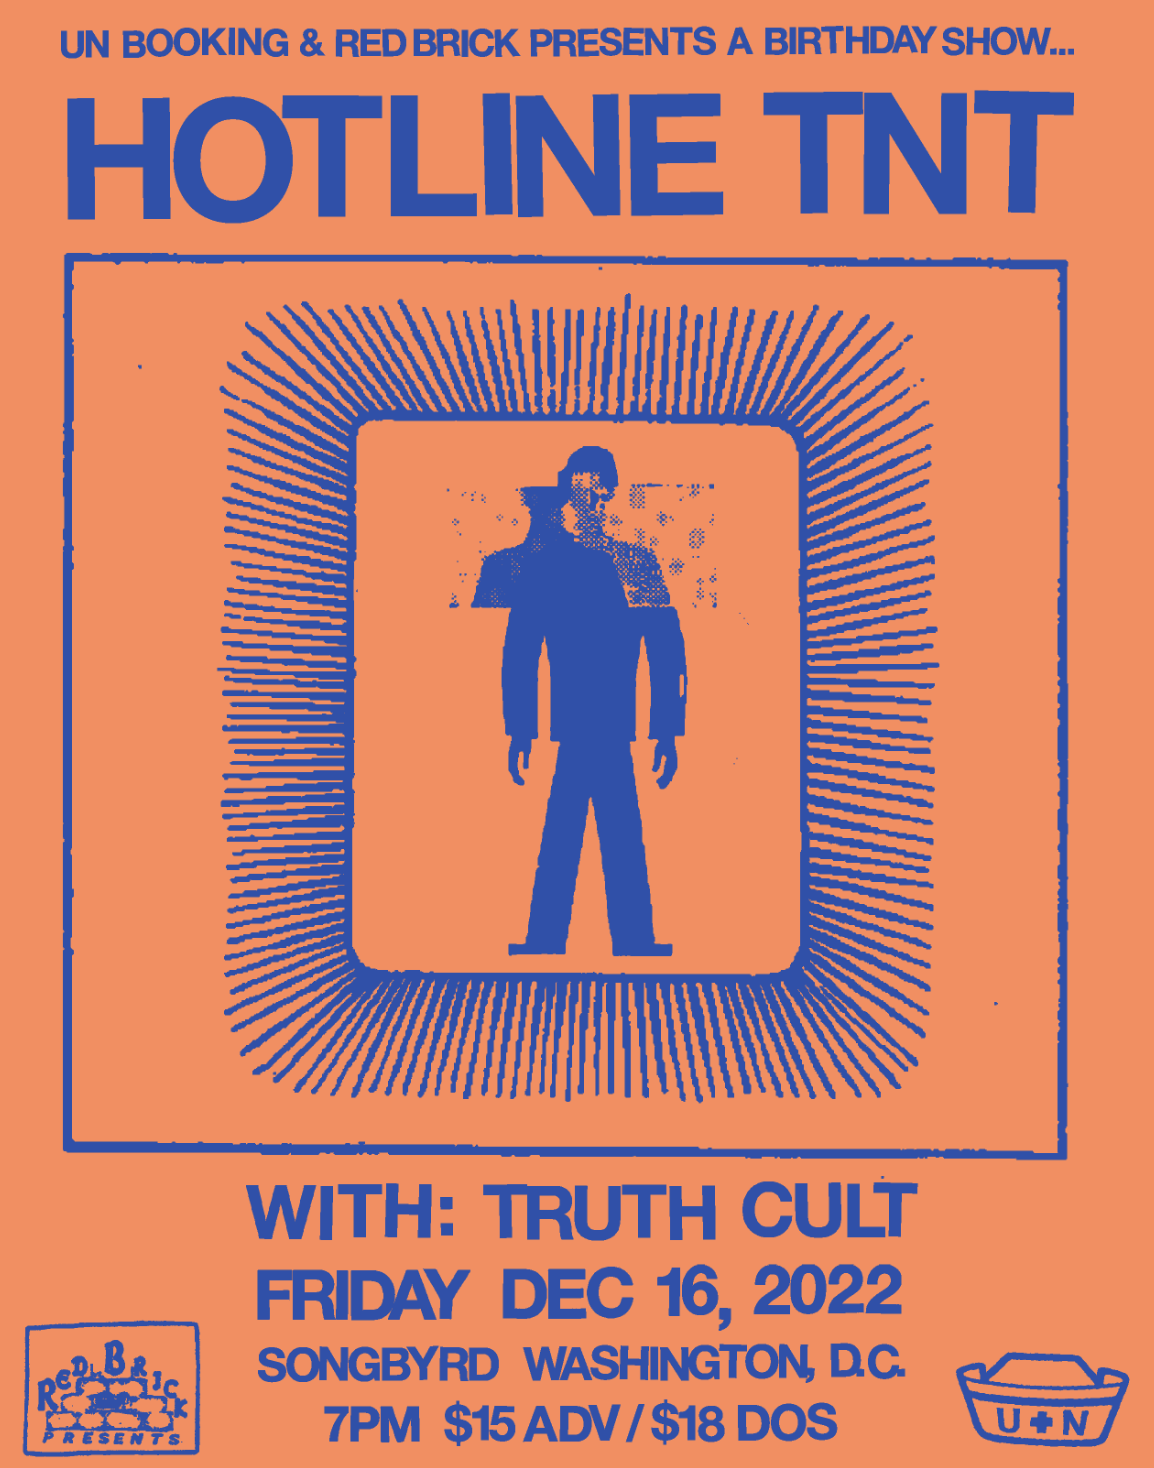 Truth Cult opens for Hotline TNT